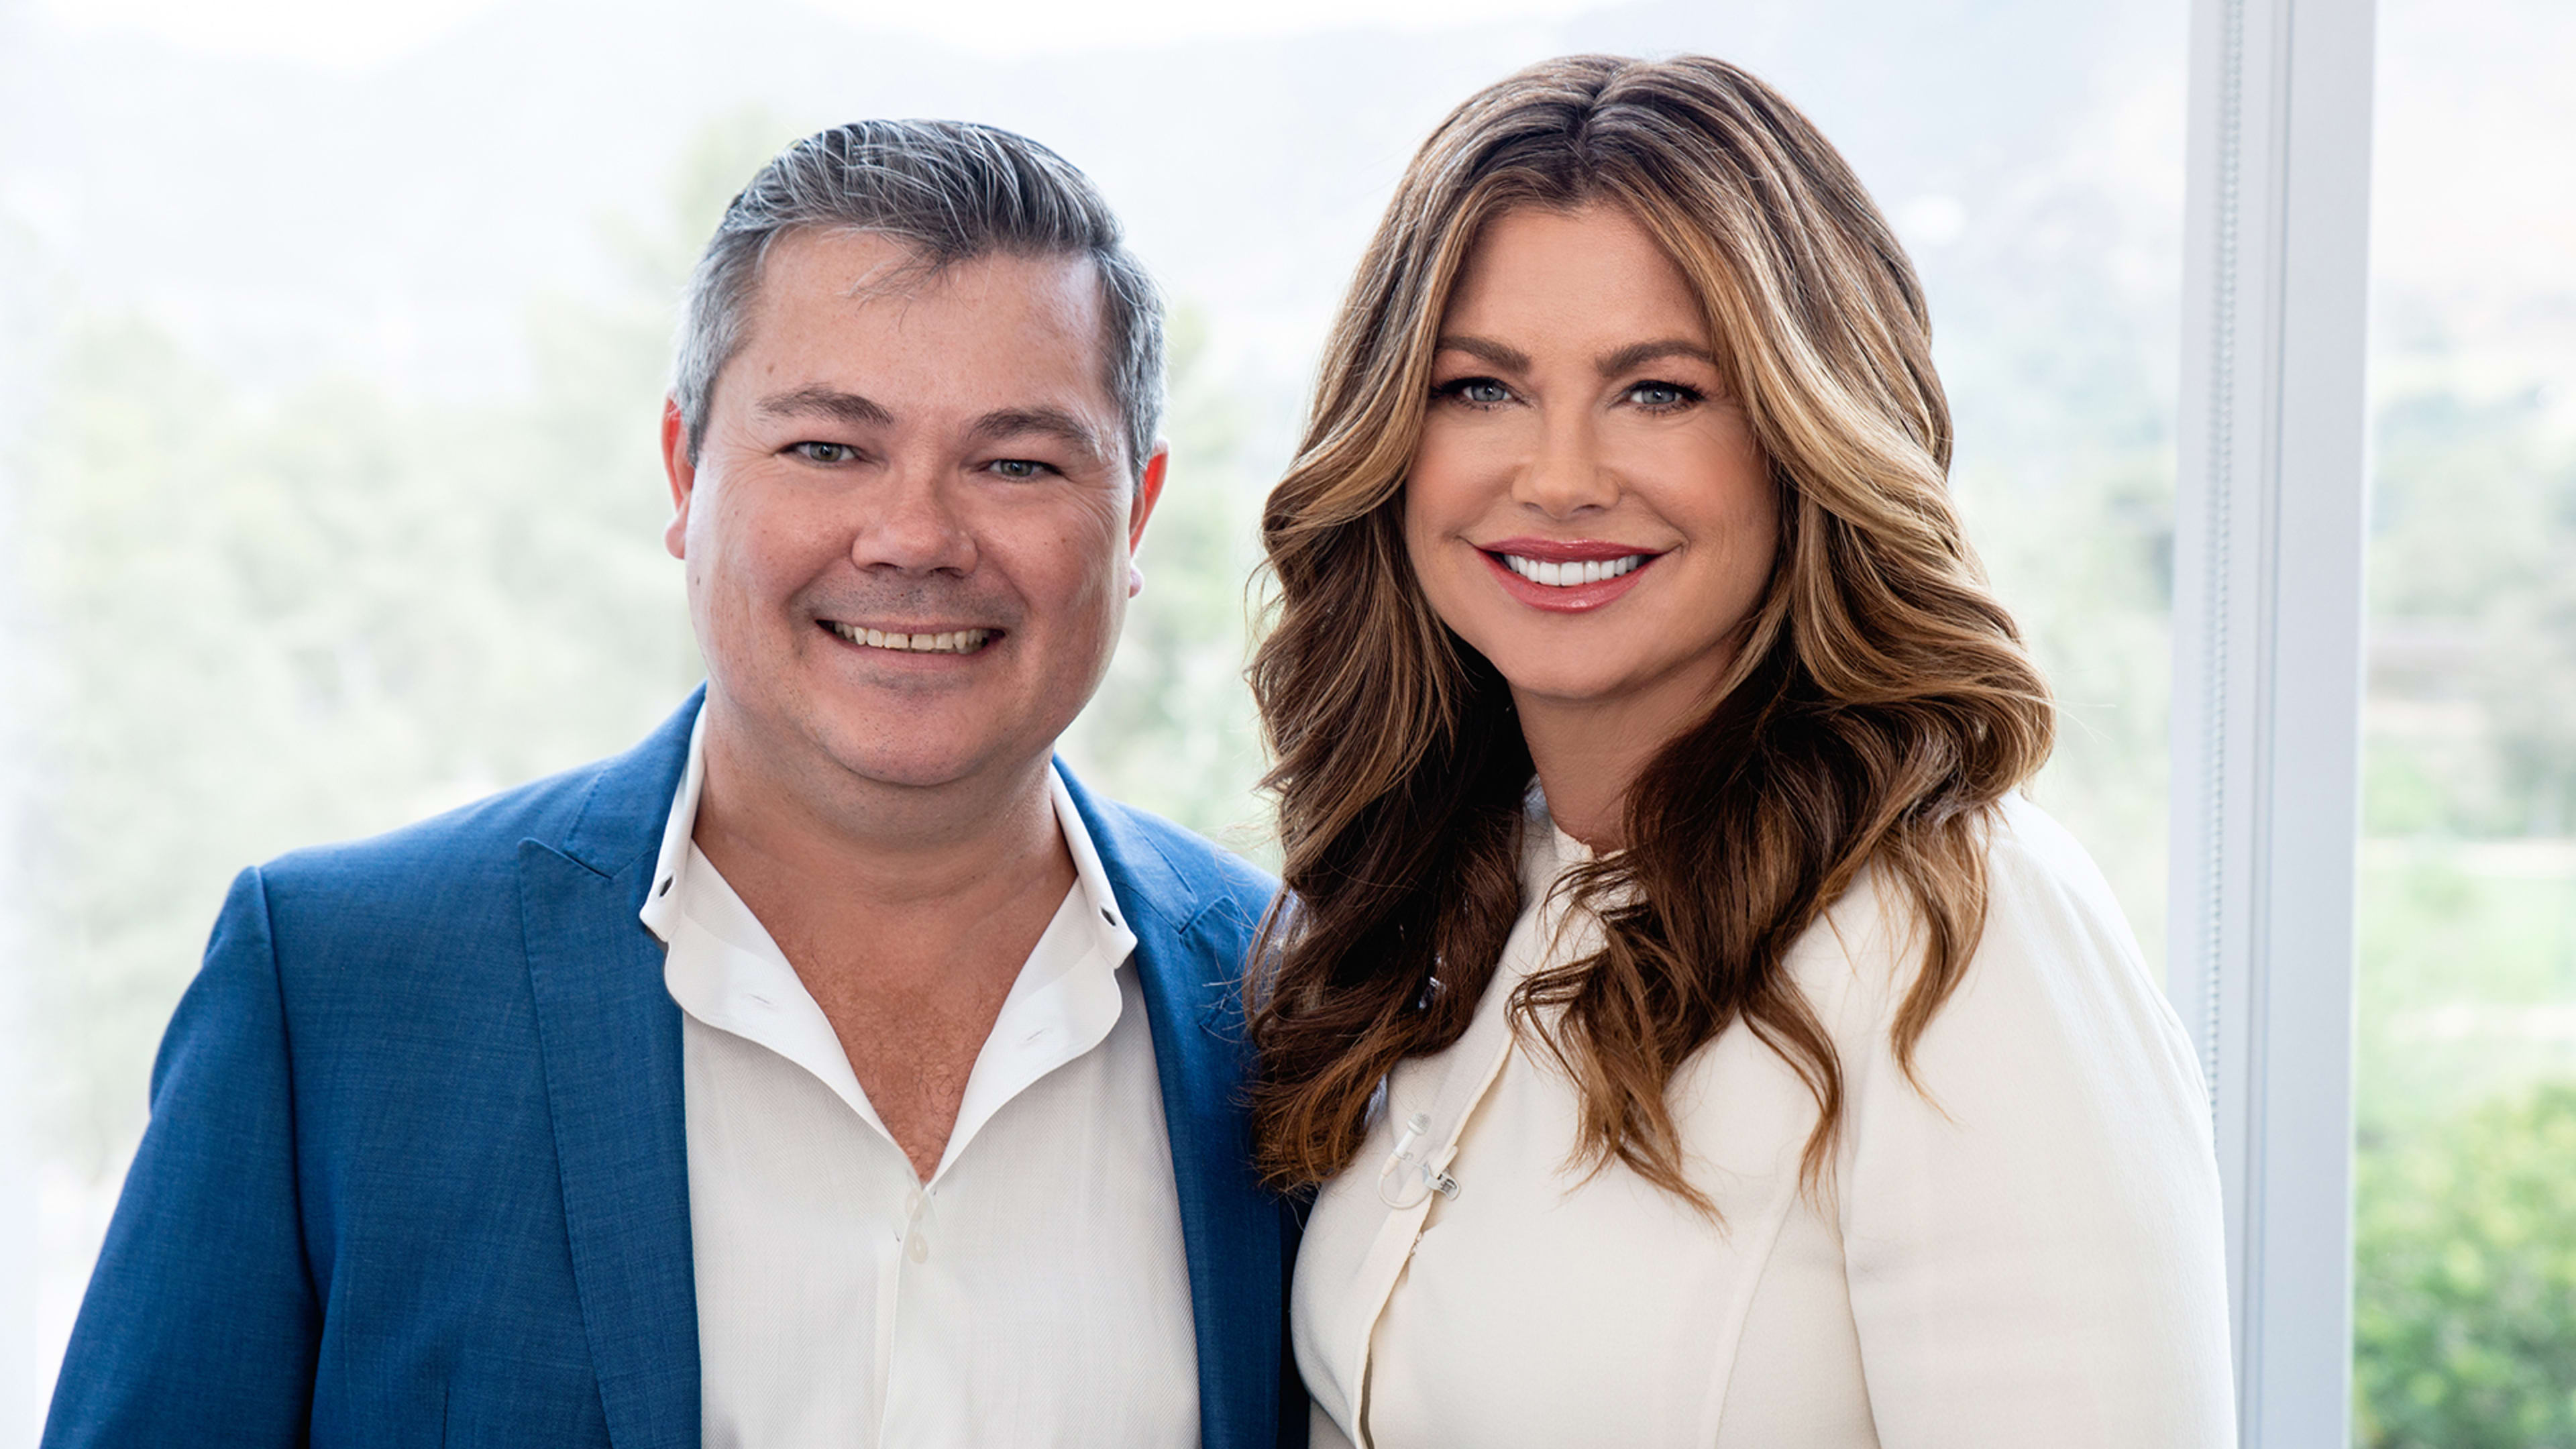 People love Kathy Ireland’s curtains. Will they buy her cannabis products?